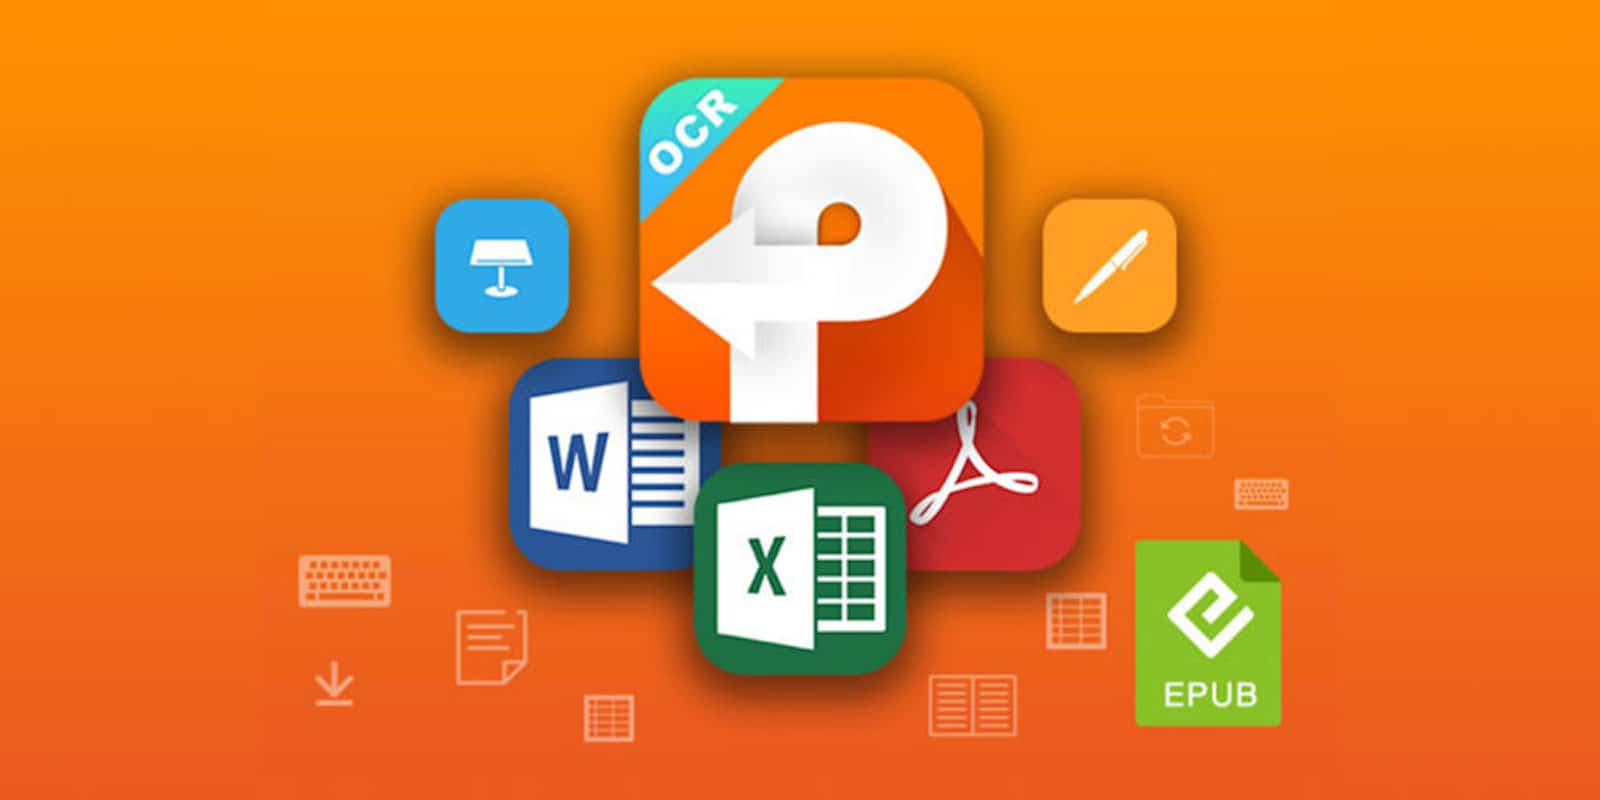 With this app, PDFs can be edited just as easily as a Word doc.